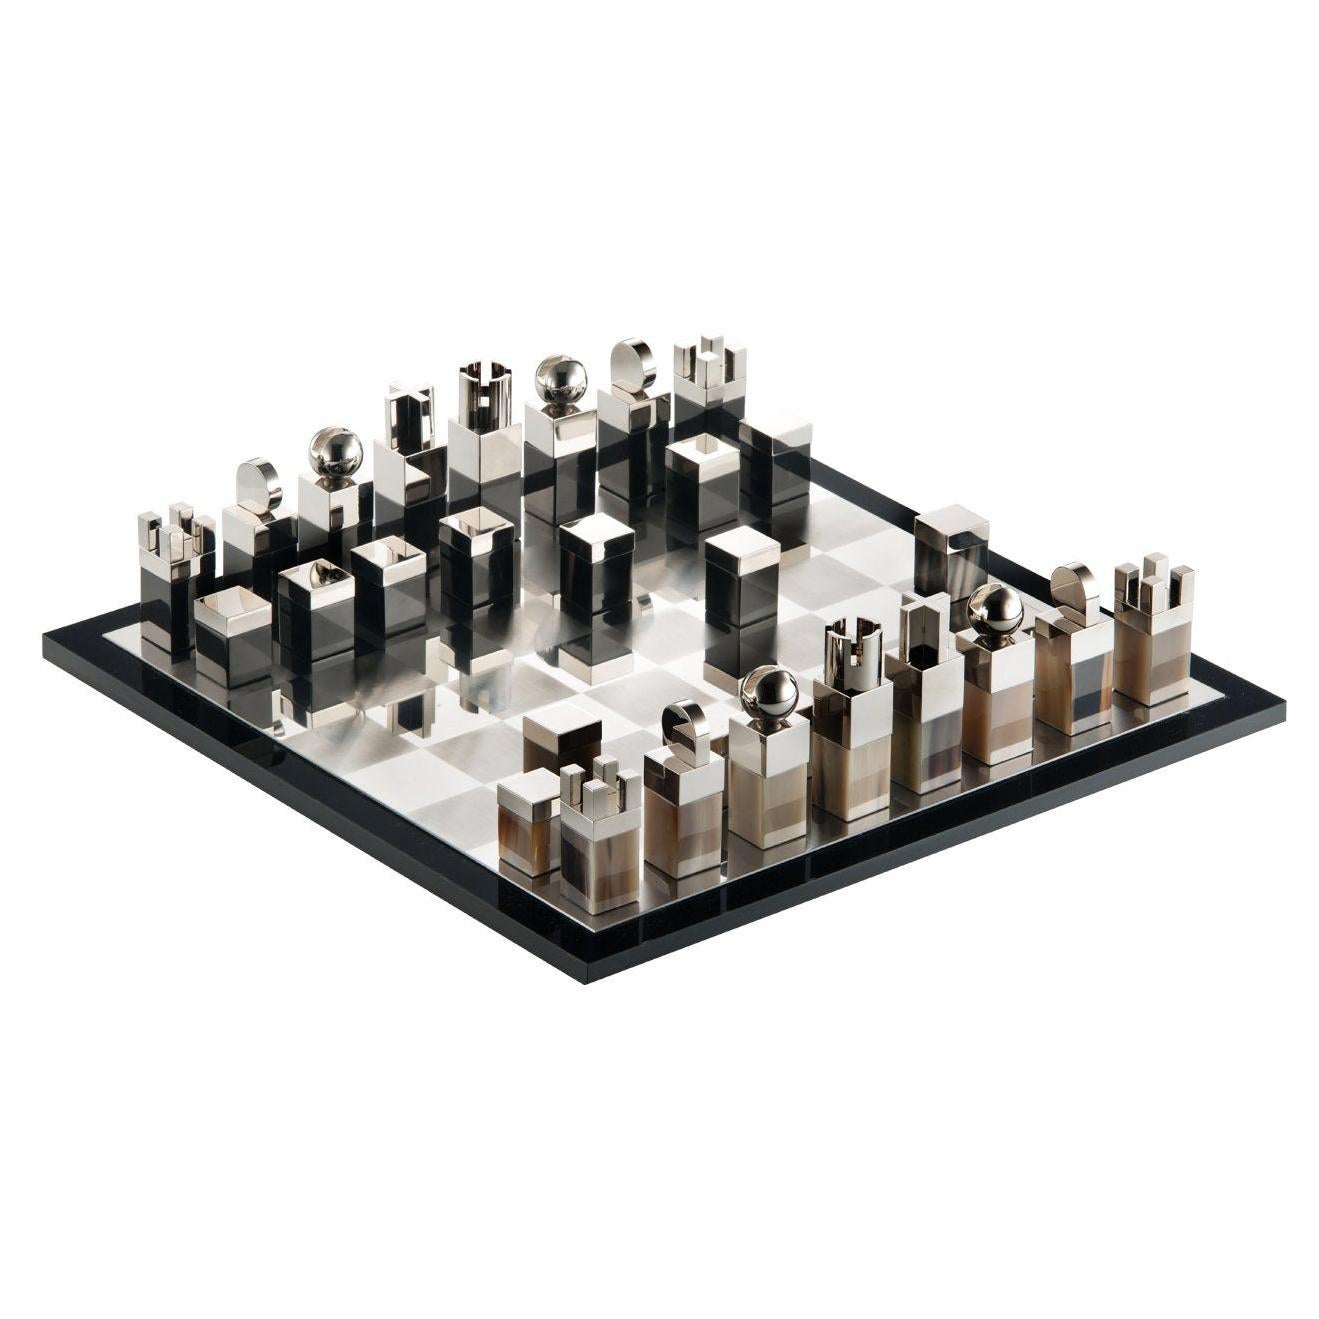 Nelson Chess Set by A. Andreucci